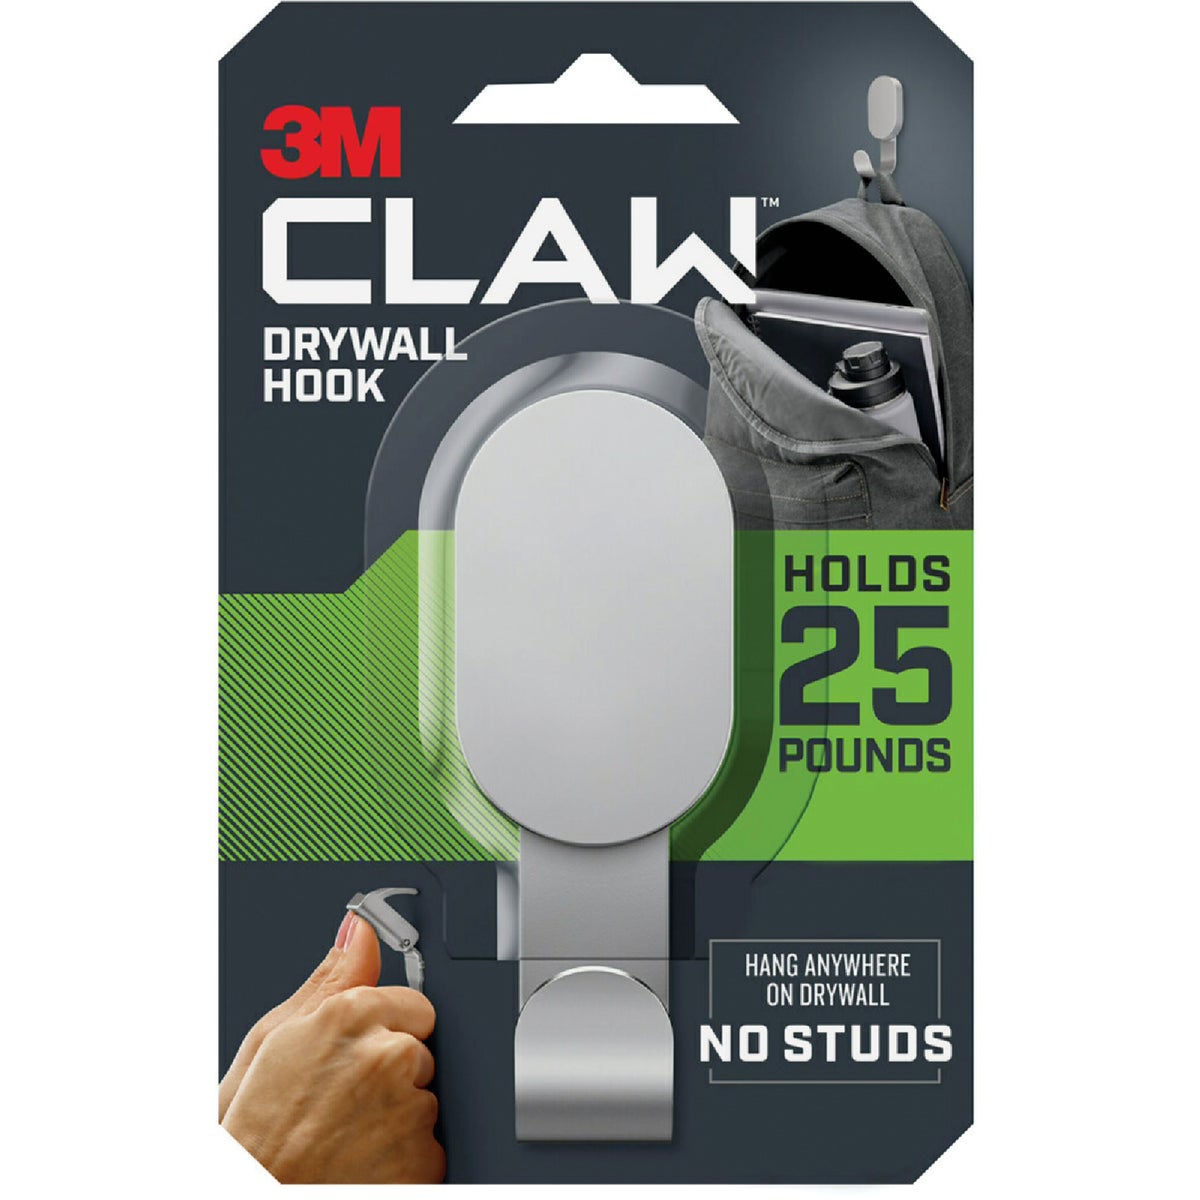 3M Claw 4-Pack 25 Lb. Drywall Picture Hangers